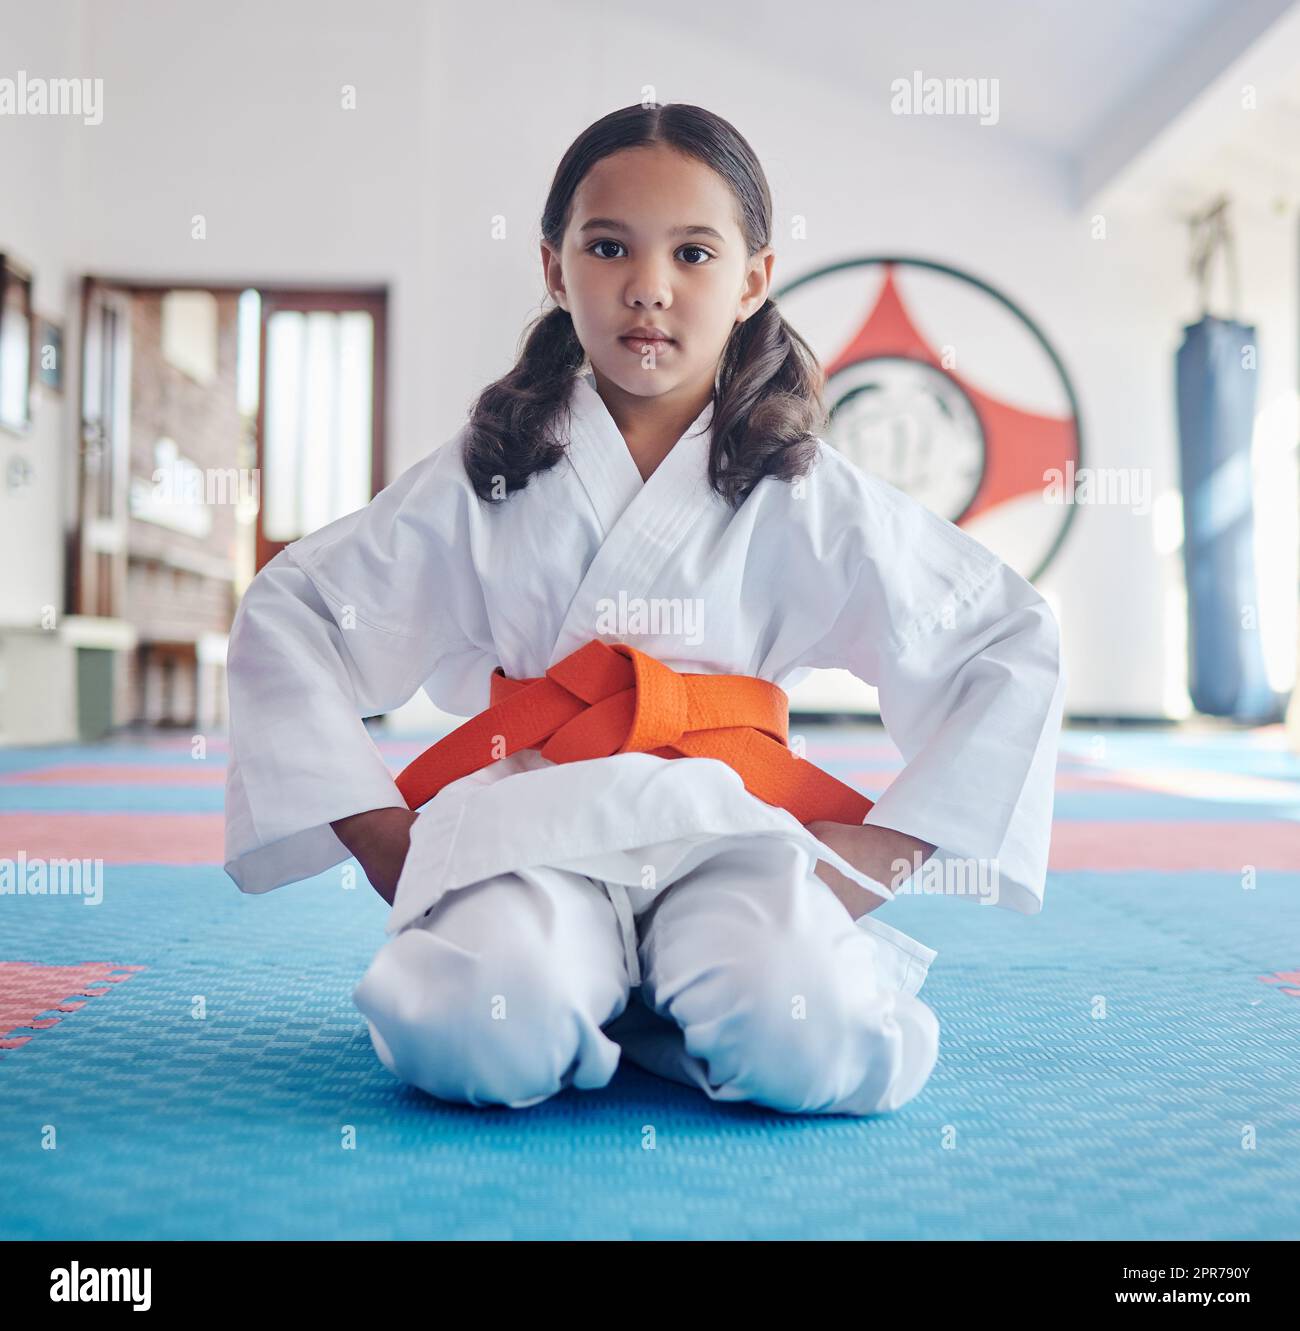 With confidence comes courage. Shot of a cute little girl practicing karate in a studio. Stock Photo